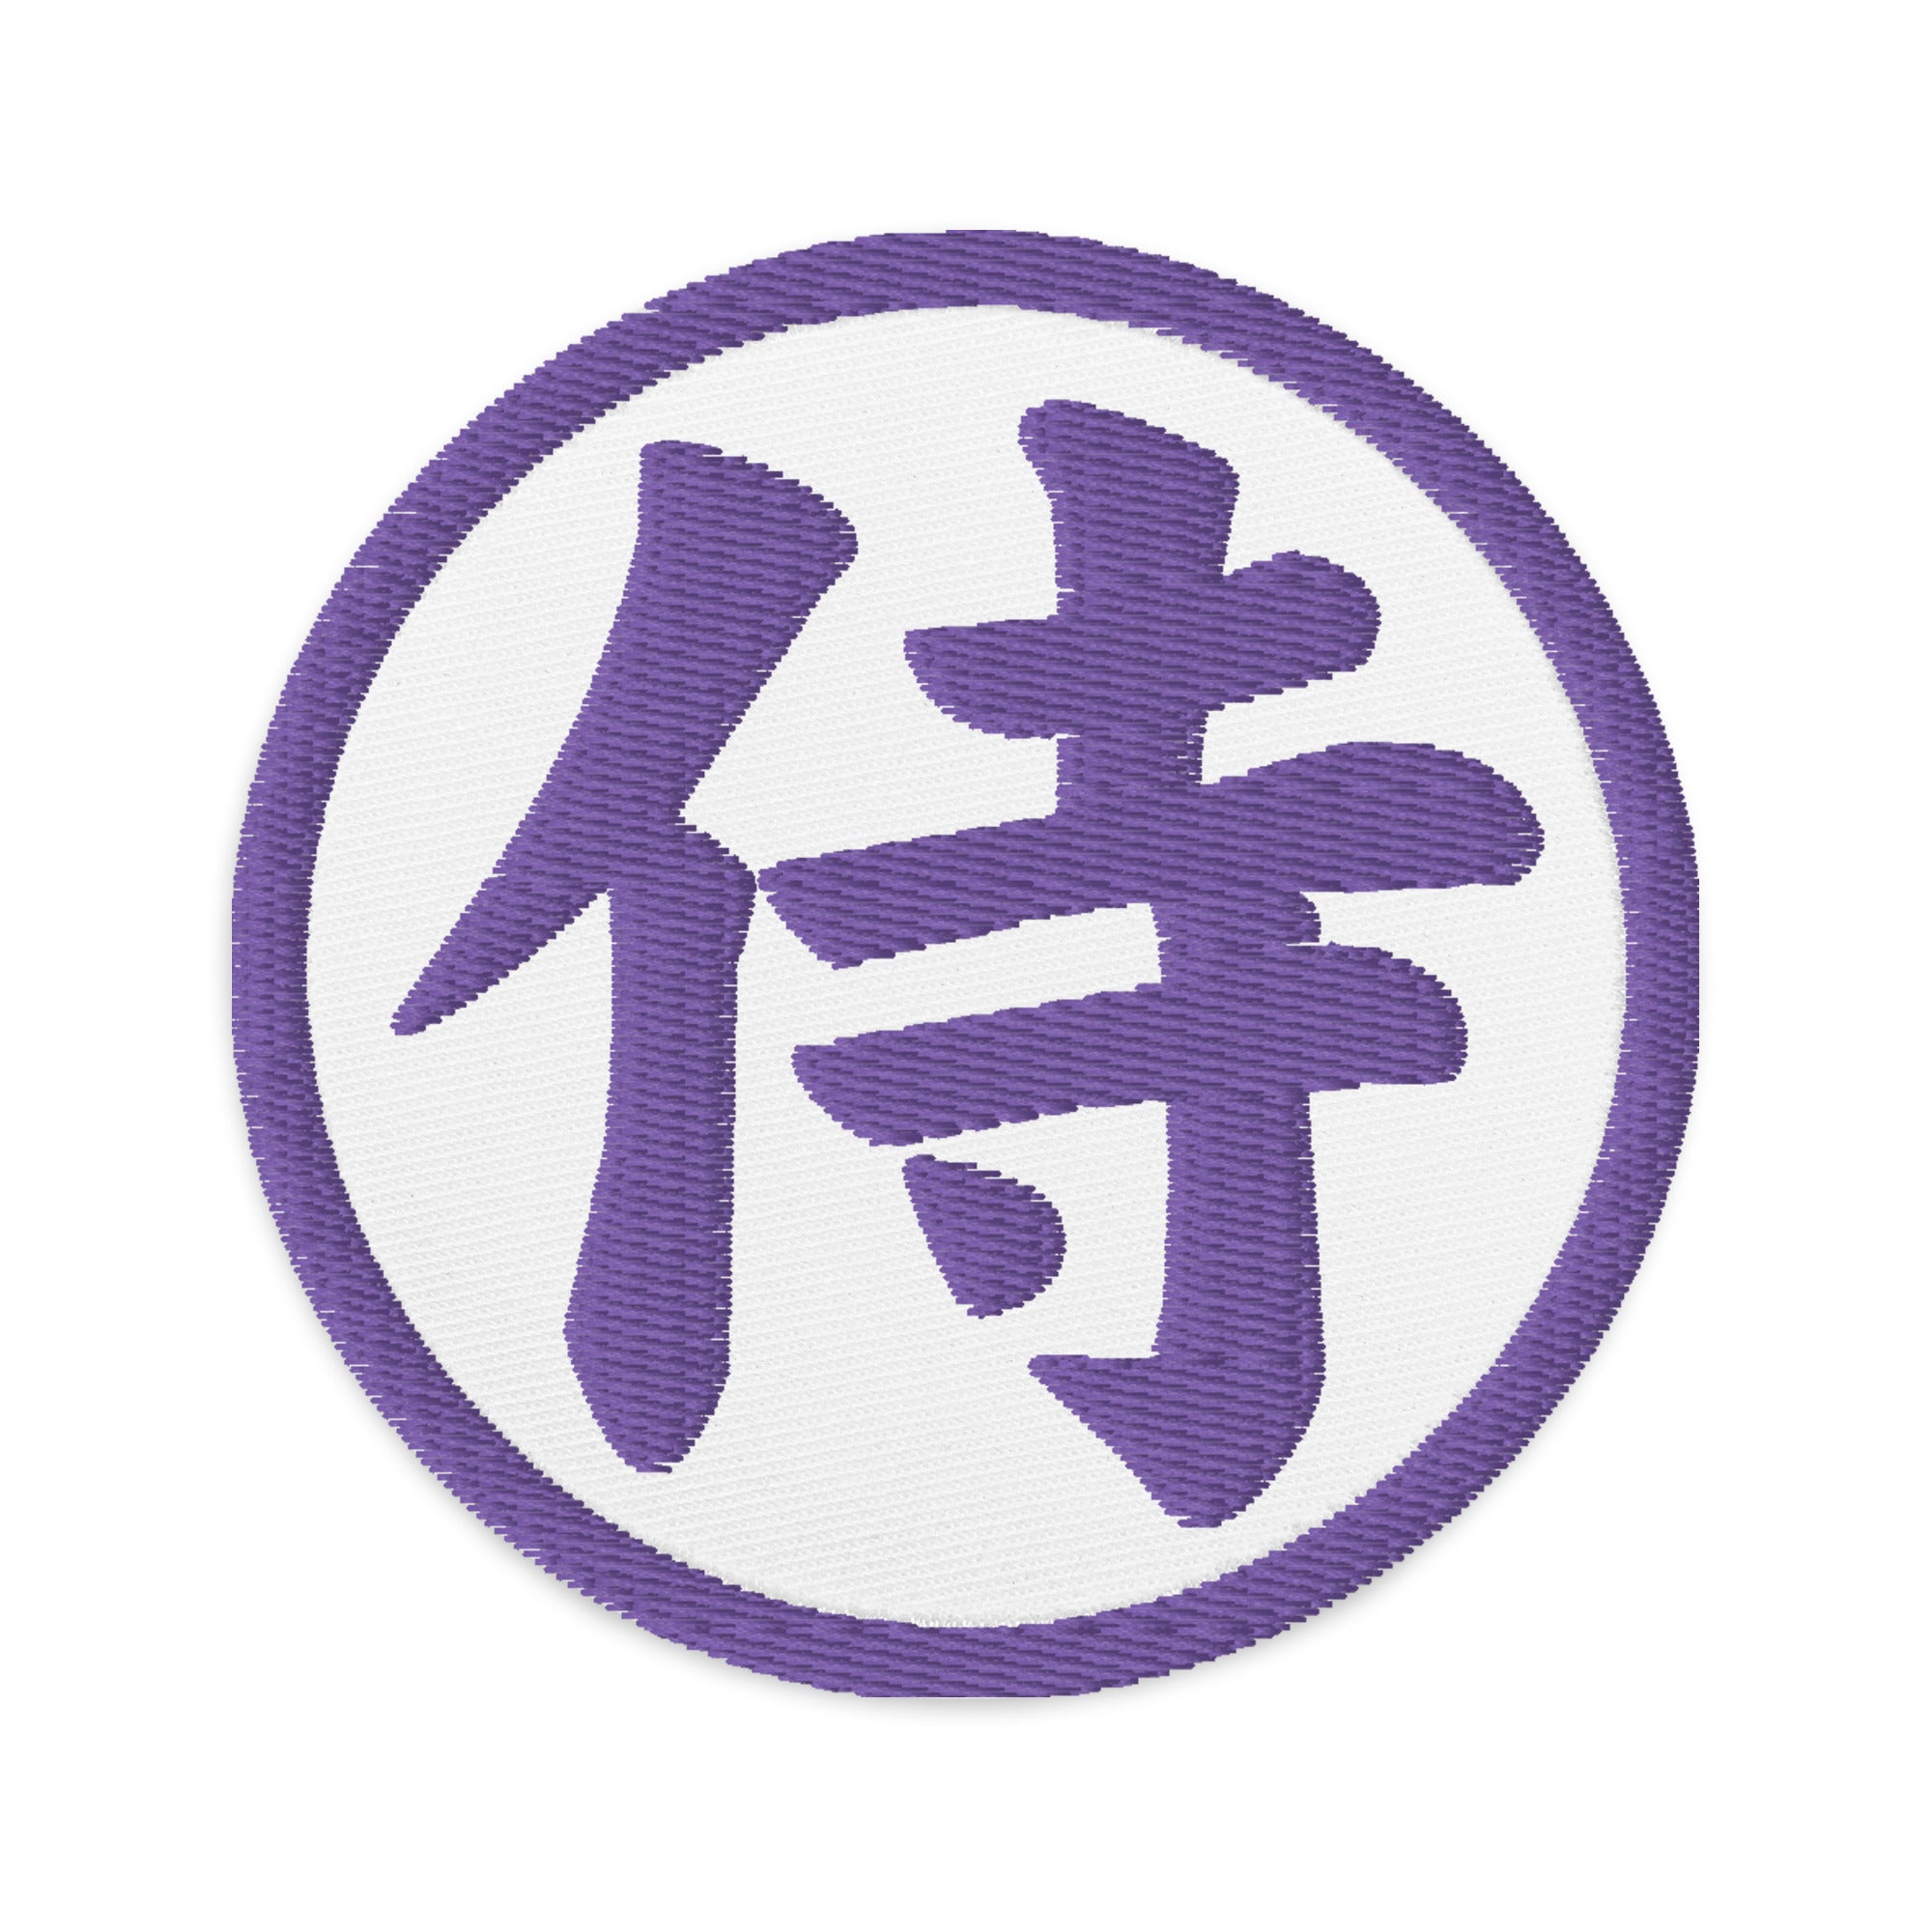 Samurai The Japanese Kanji Symbol Embroidered Patch Purple Thread Patches - Edge of Life Designs